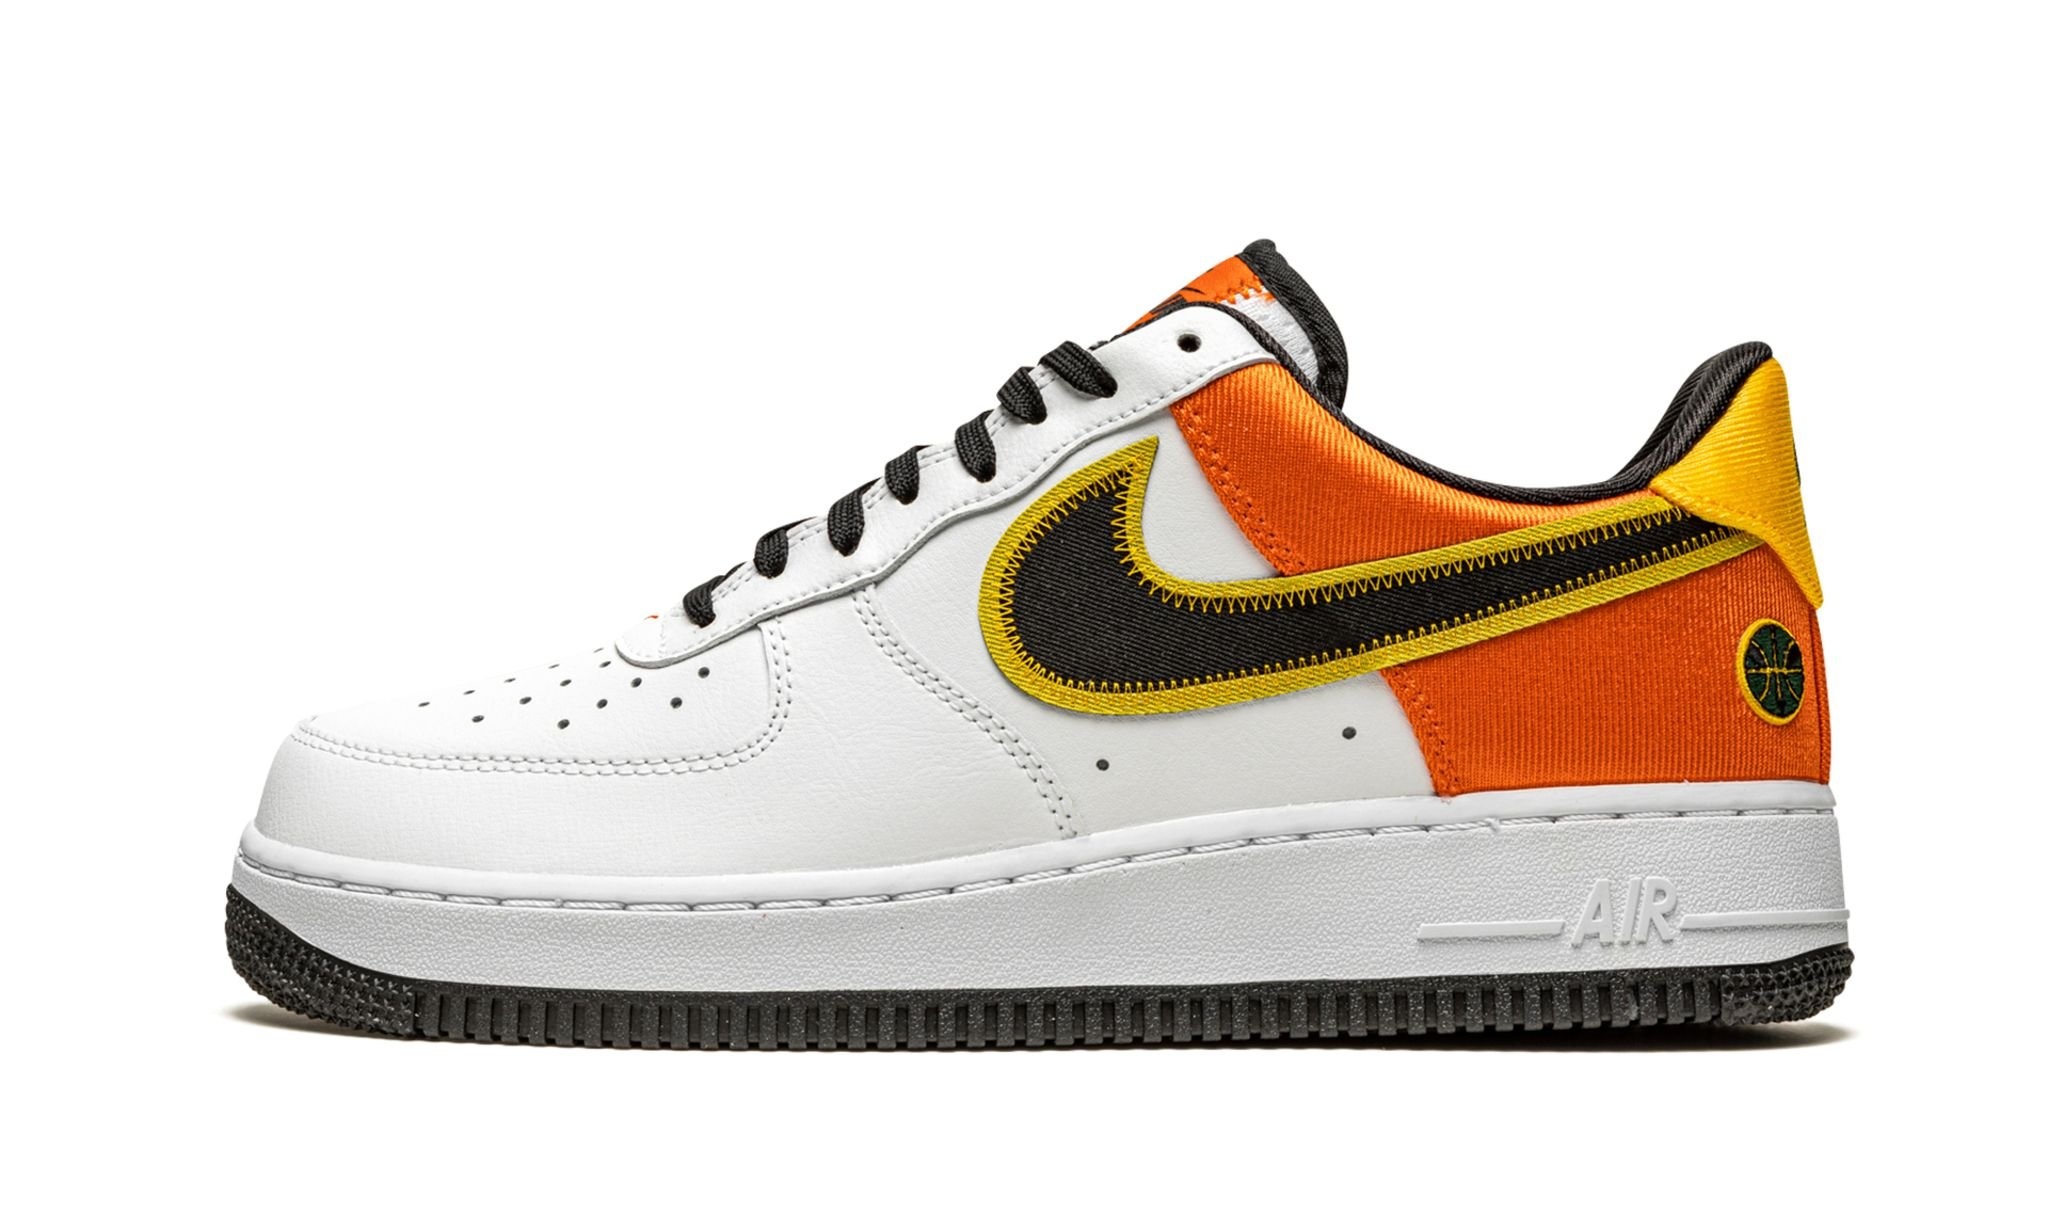 Air Force 1 Low "Rayguns" - 1